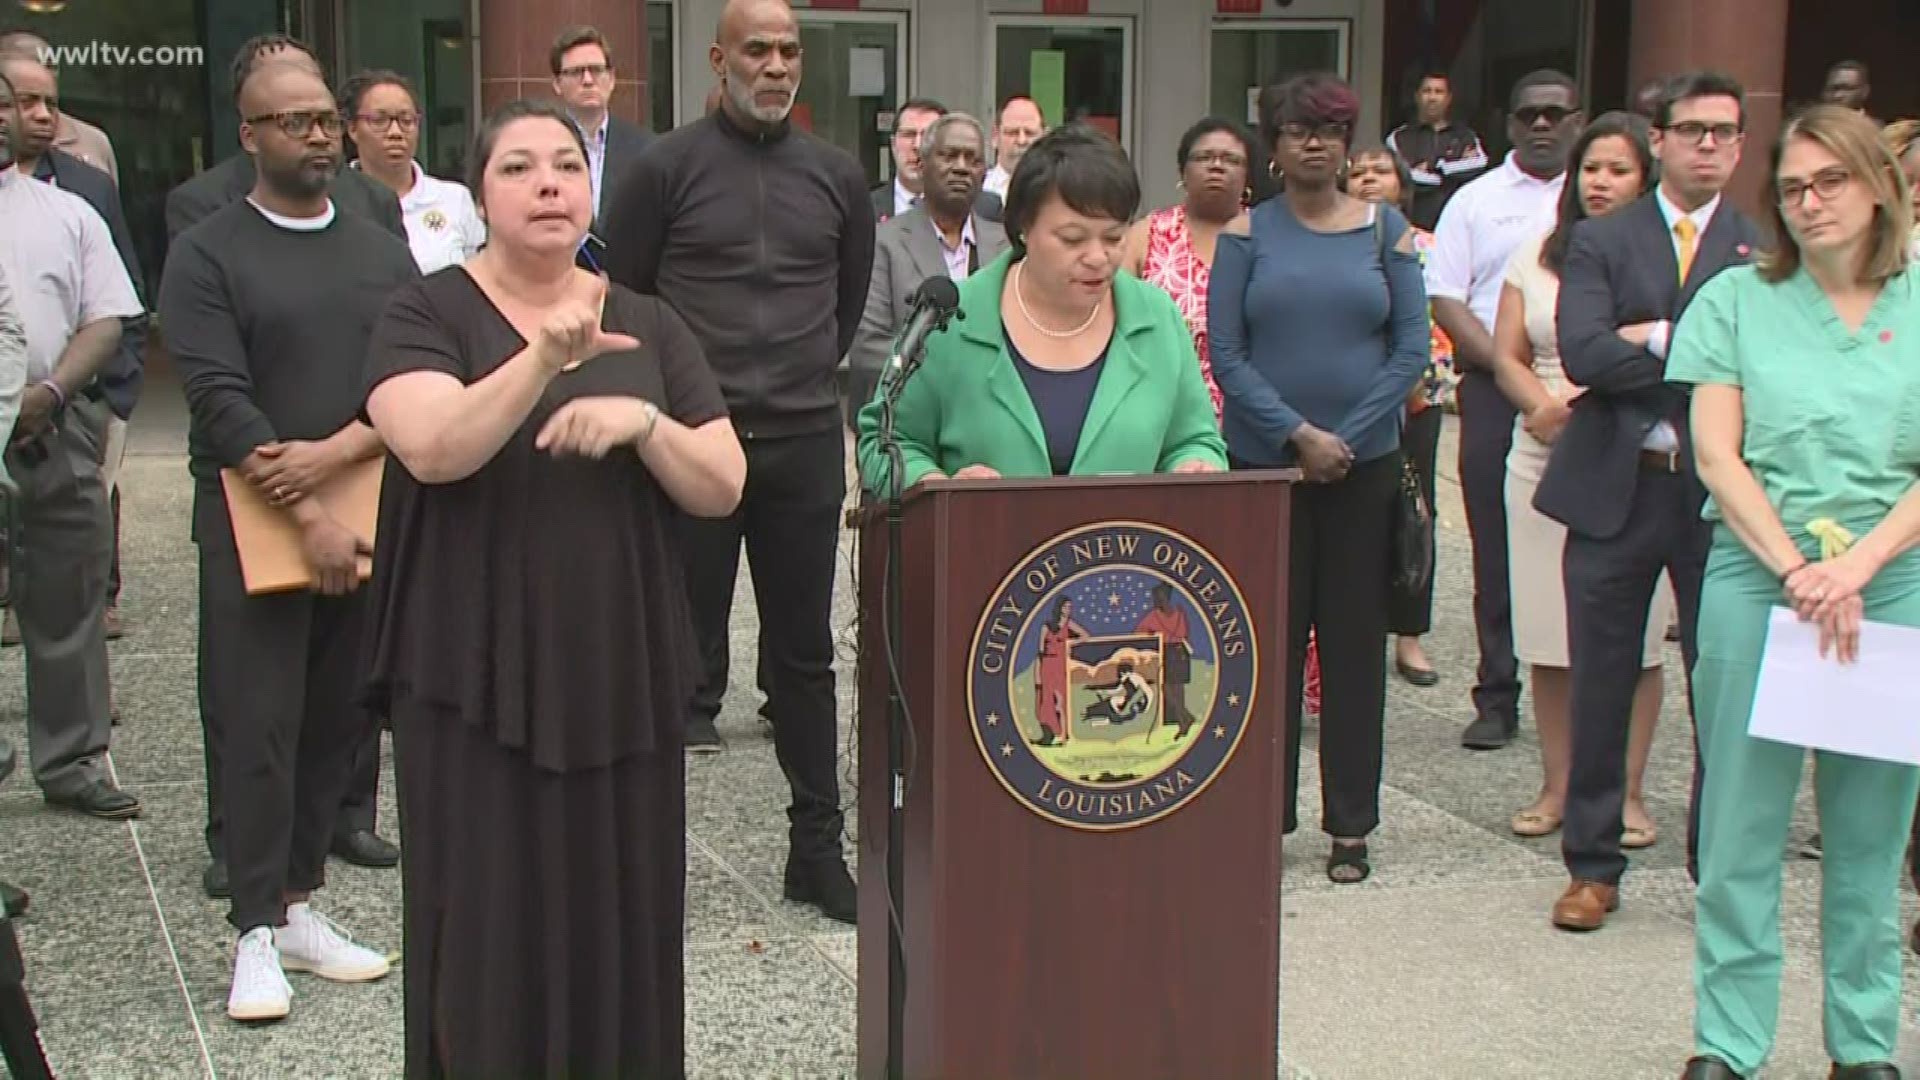 New Orleans Mayor LaToya Cantrell announced tougher regulations in the city to slow the spread of coronavirus and COVID-19.